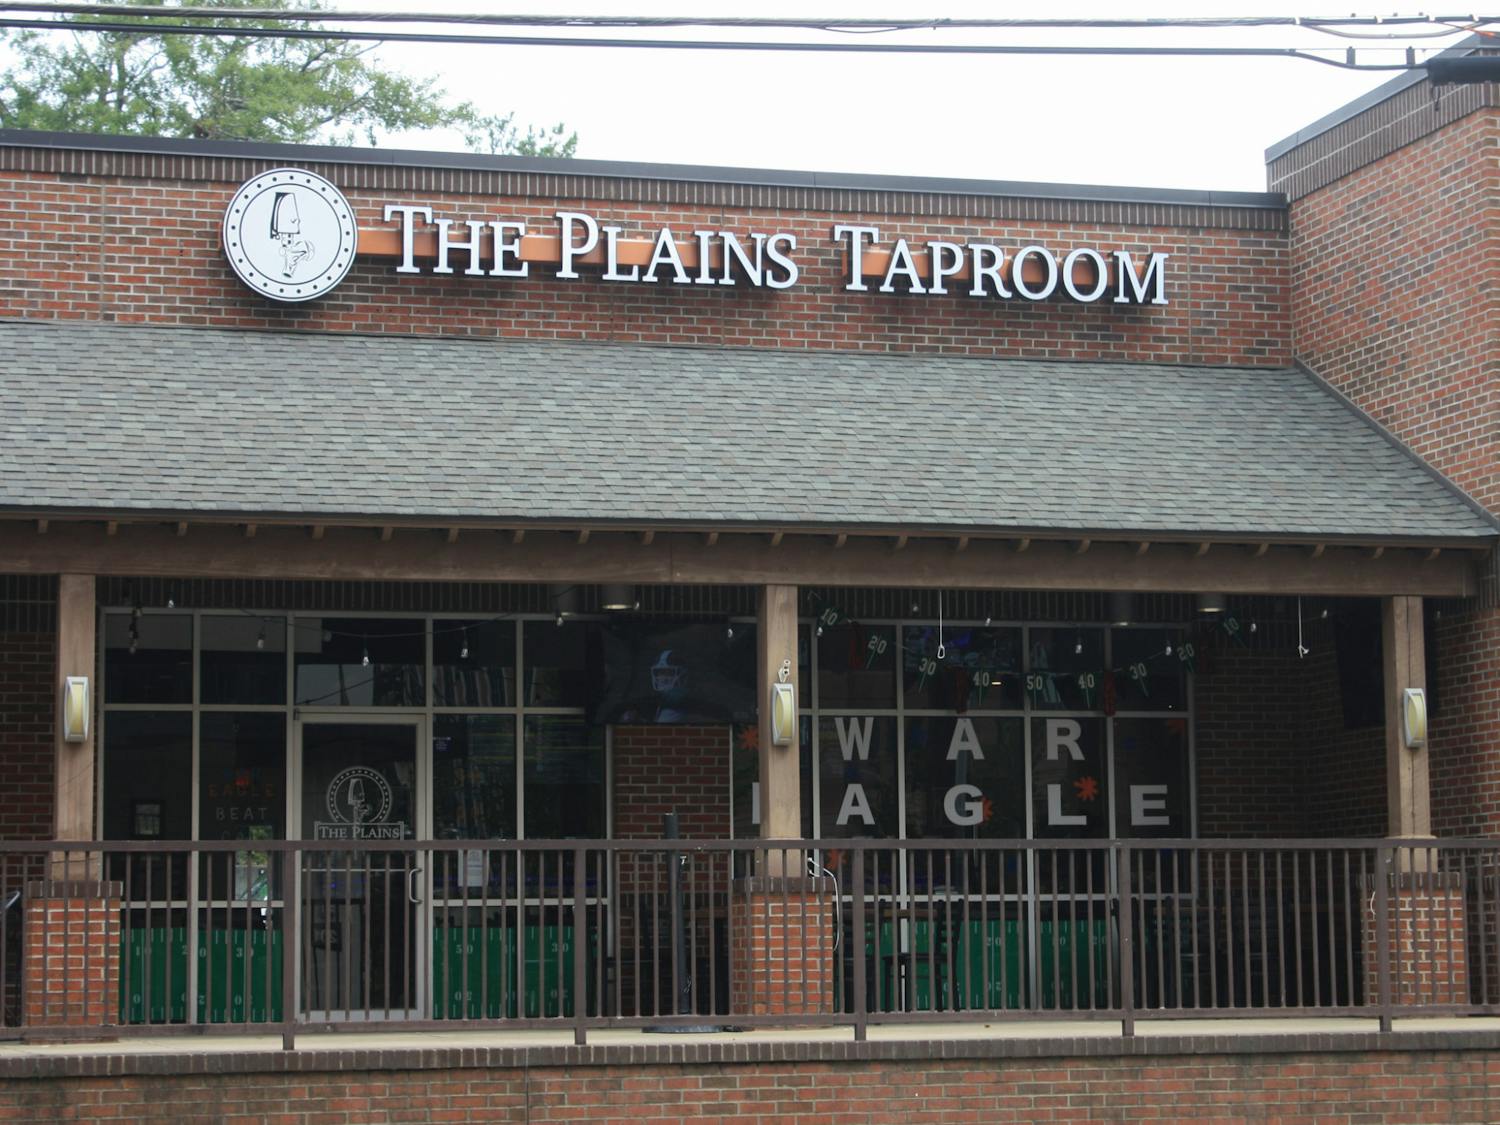 The Plains Taproom